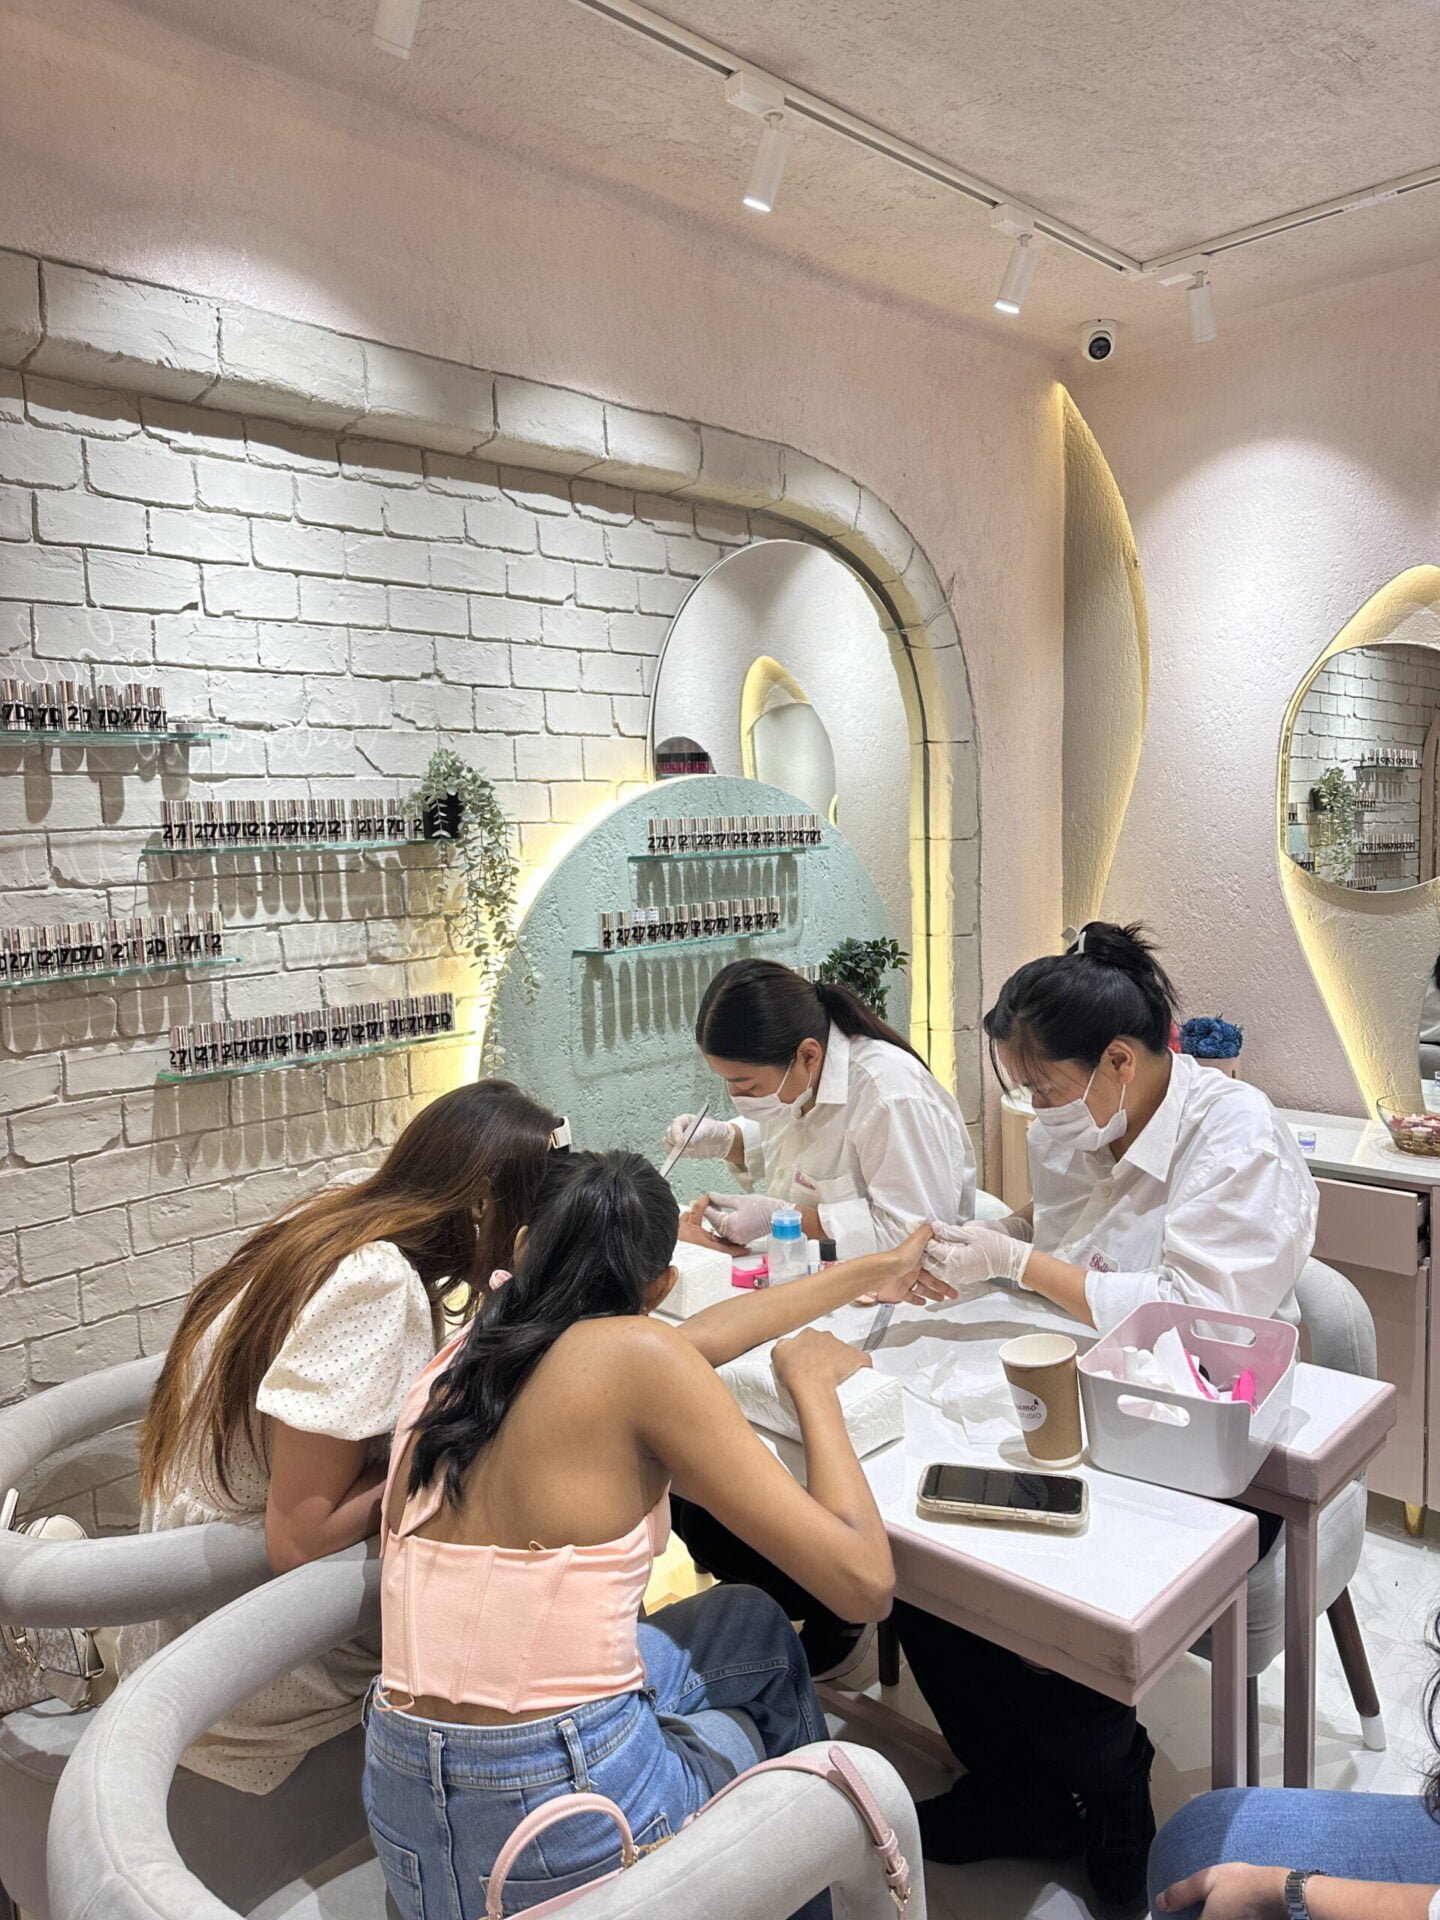 Ultimate Nail Art and Extensions at Color Cafe Salon